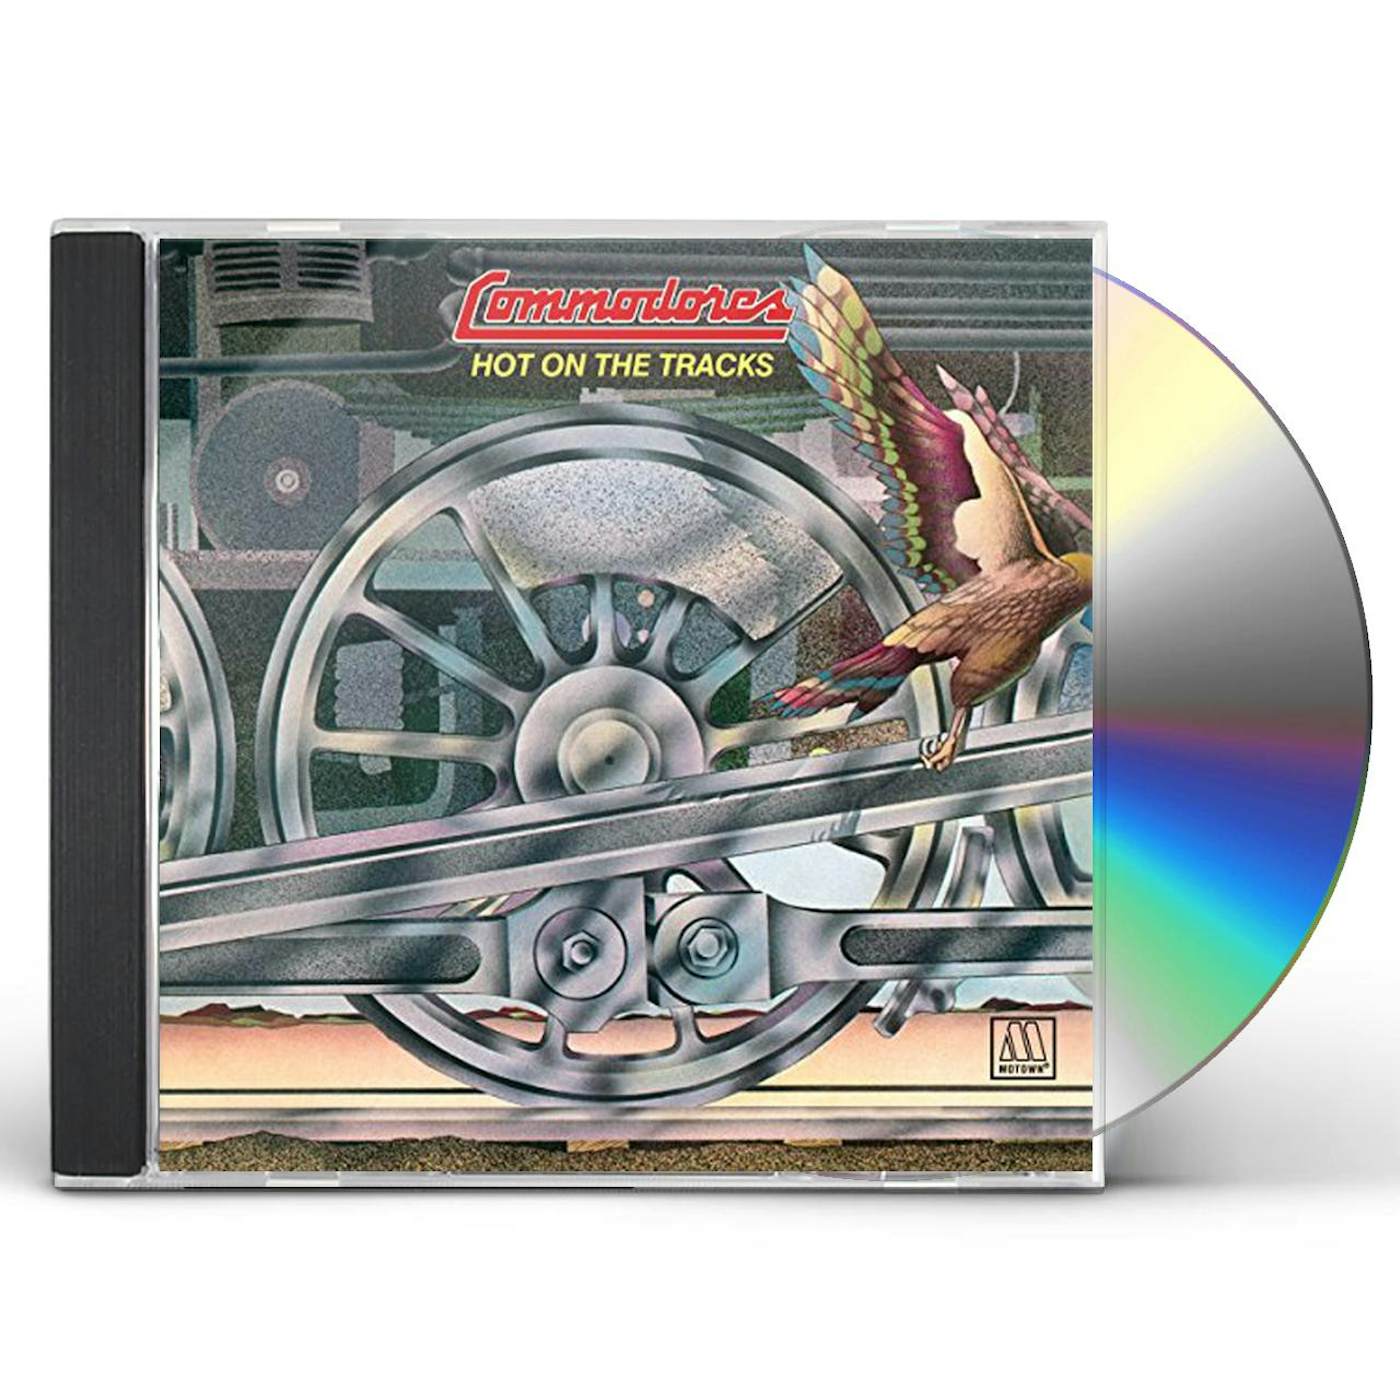 Commodores HOT ON THE TRACKS CD